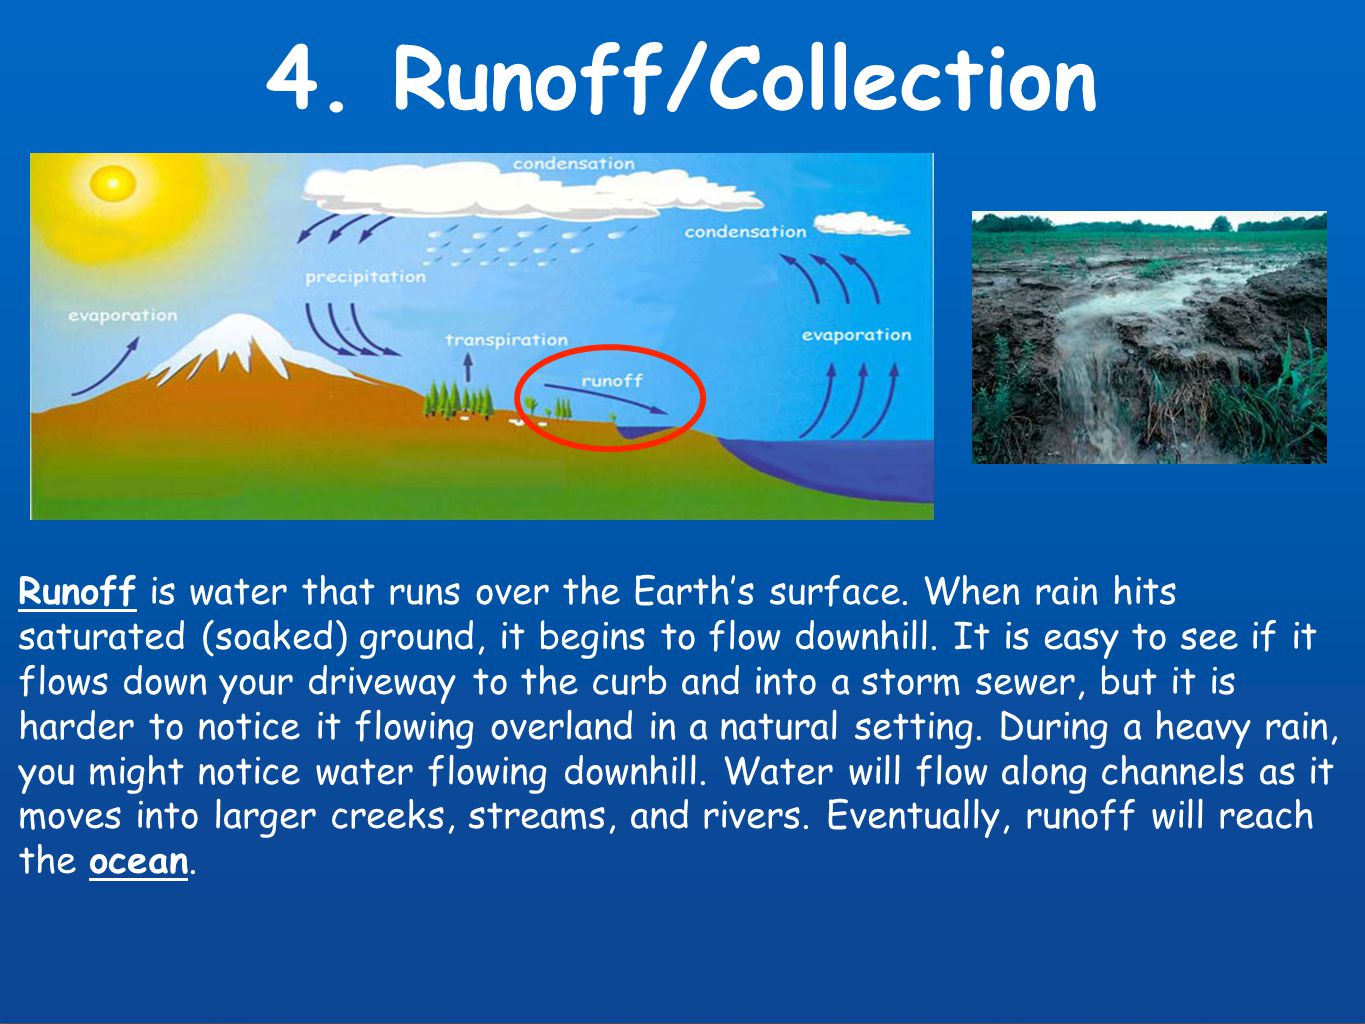 4. Runoff/Collection